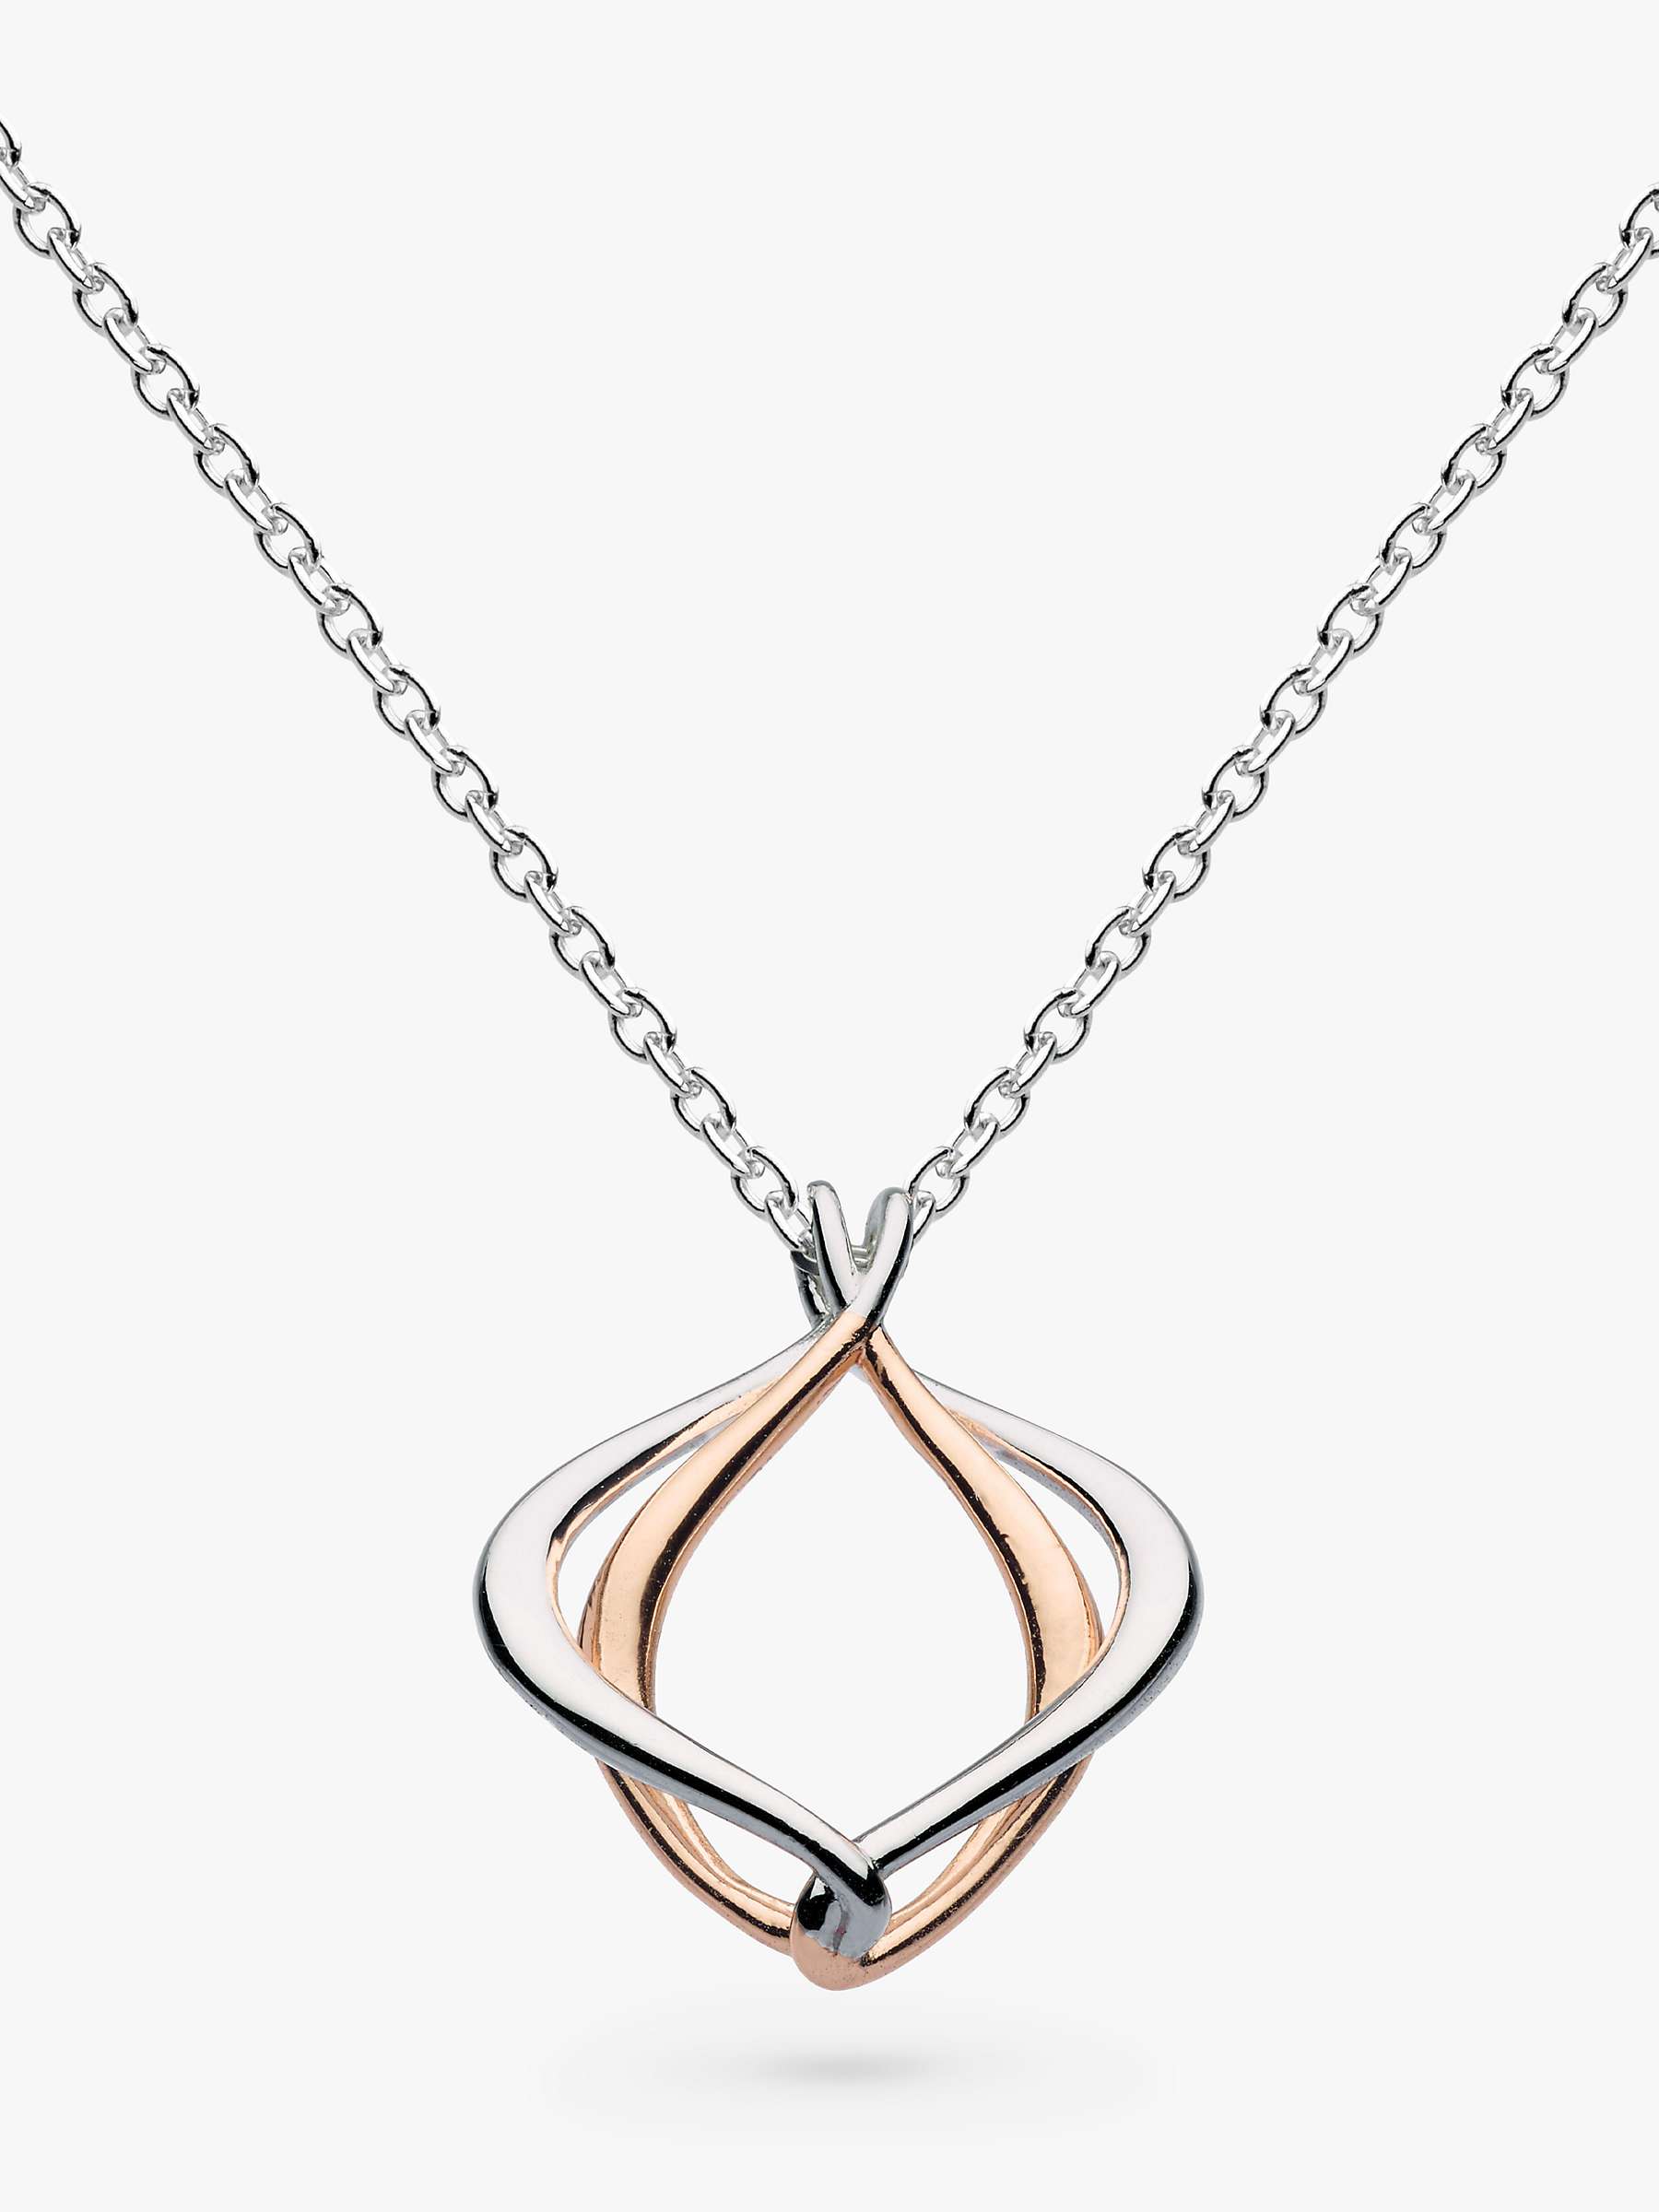 Buy Kit Heath Entwine Alicia Pendant Necklace, Silver/Rose Gold Online at johnlewis.com